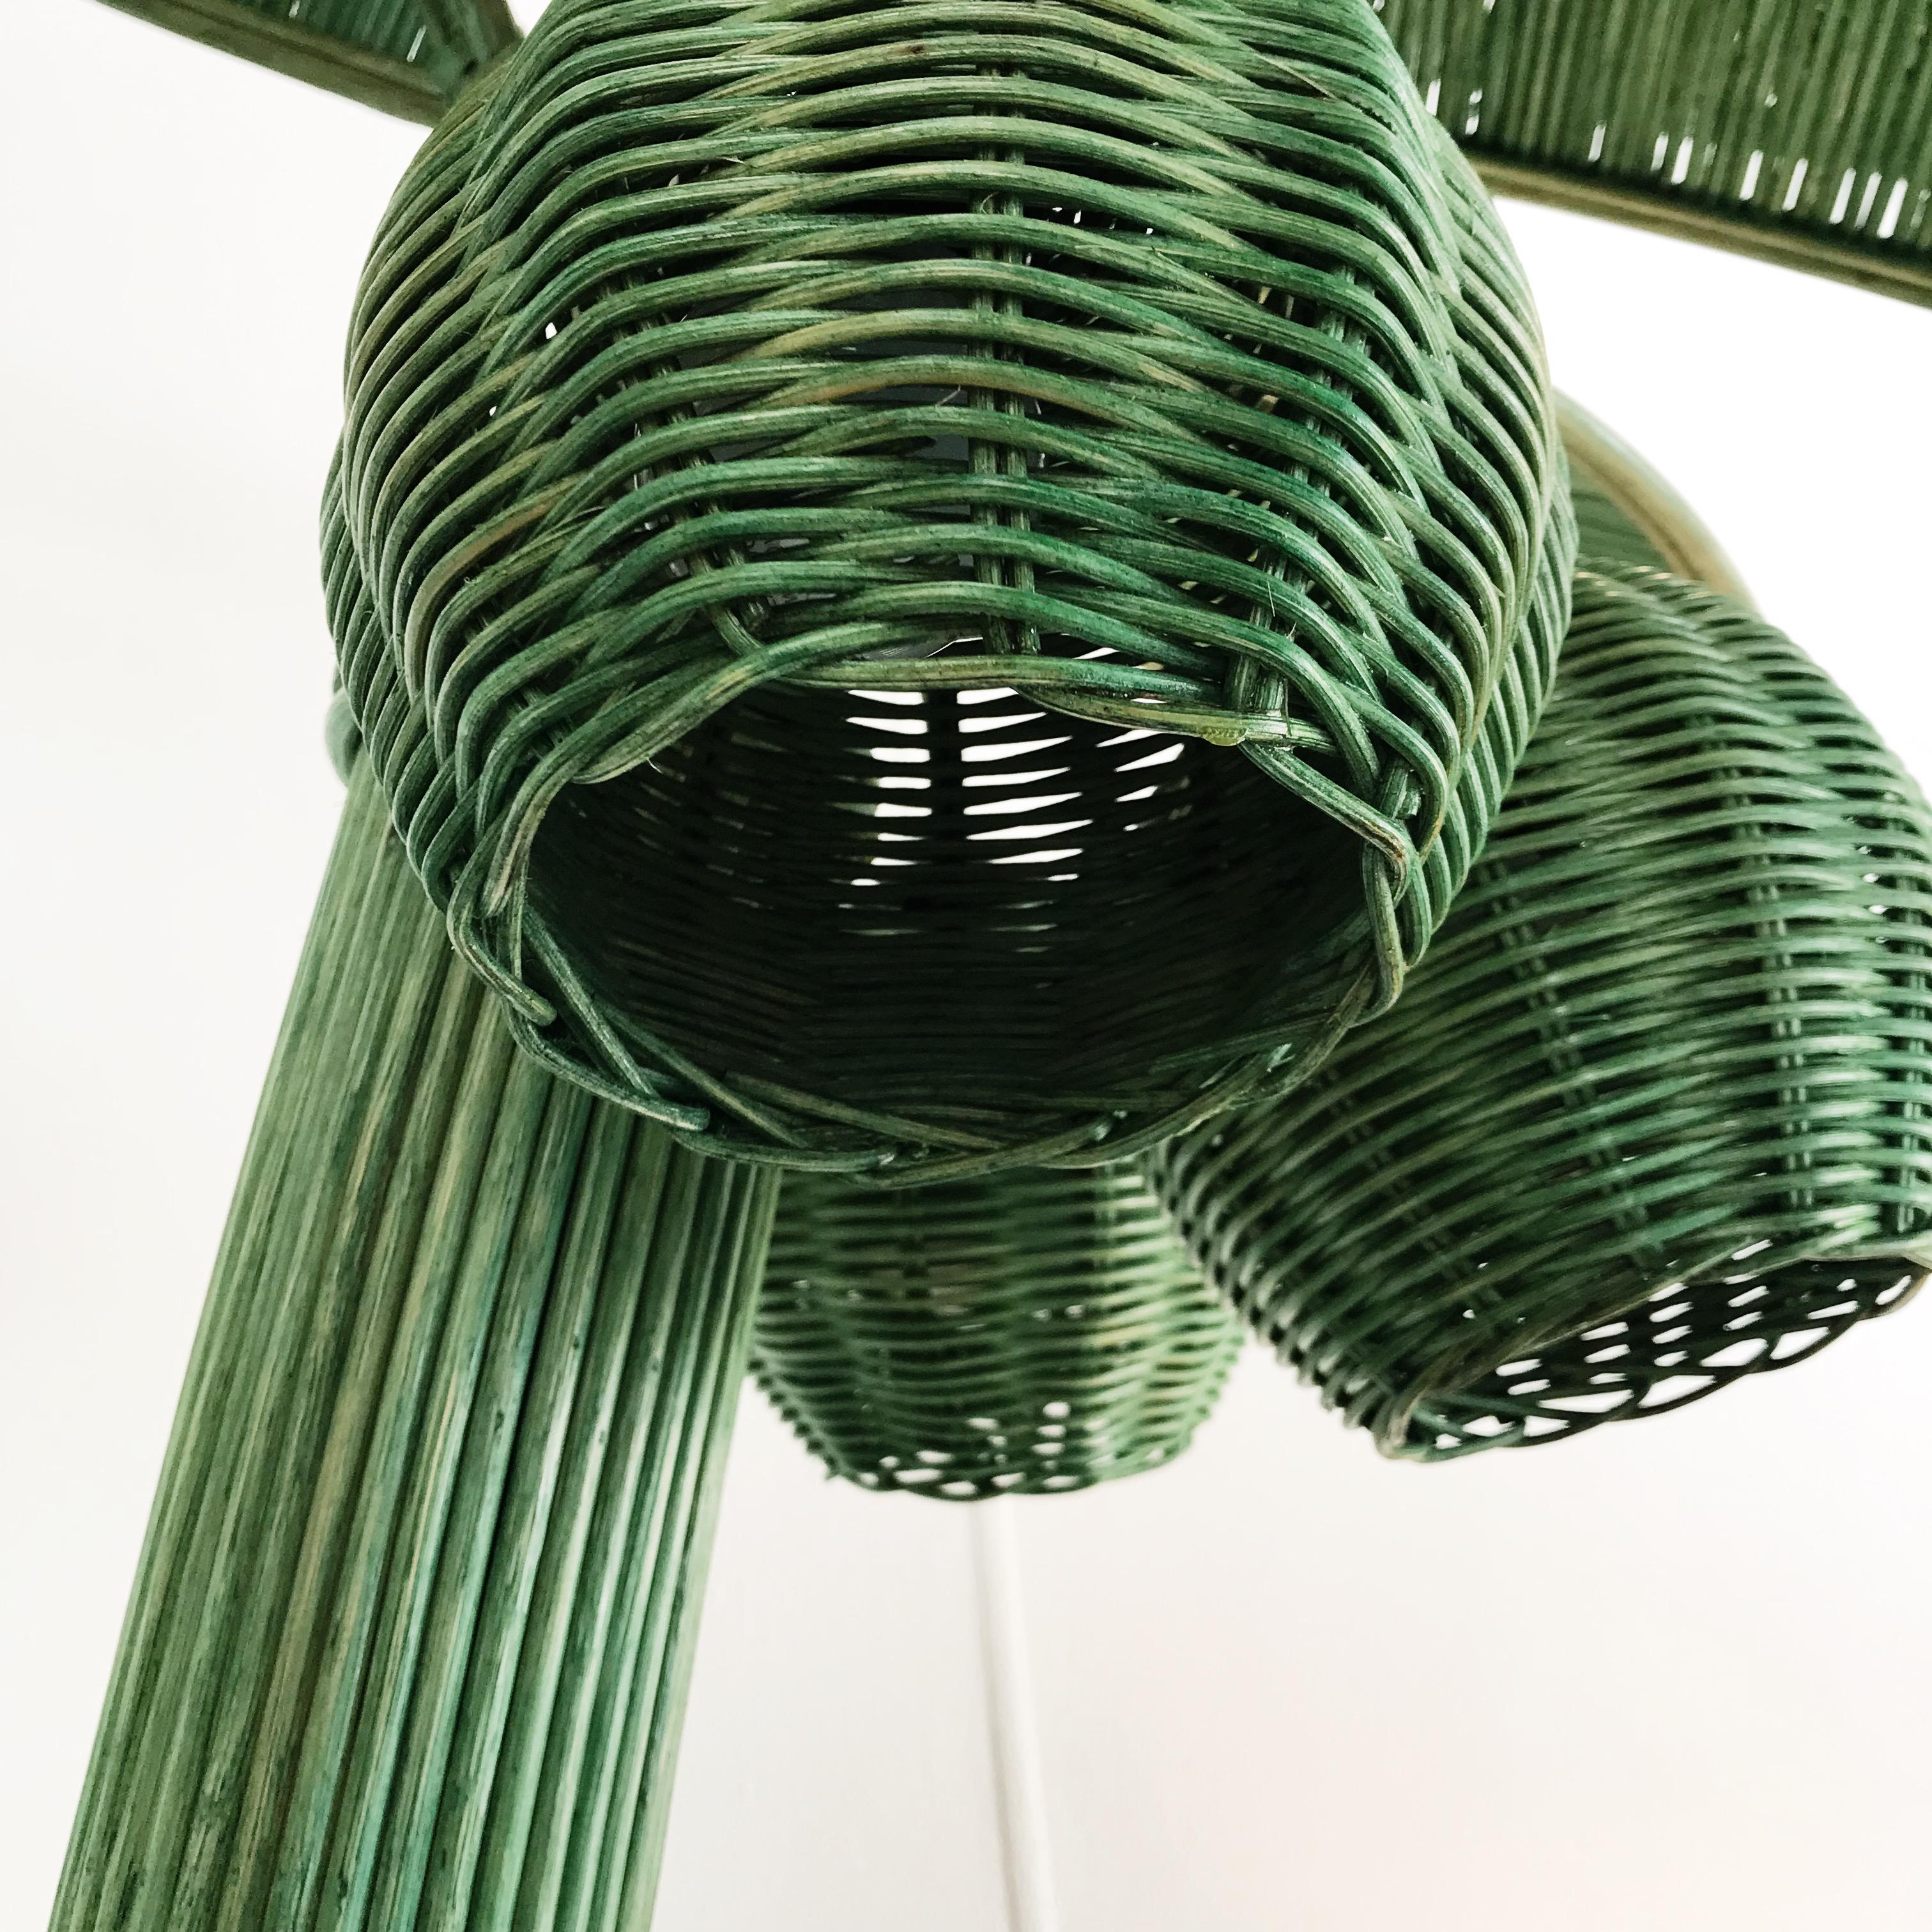 Mid-Century Modern Mexican Wicker Rattan Palm Tree Floor Lamp by Mario Lopez Torres in Jade For Sale